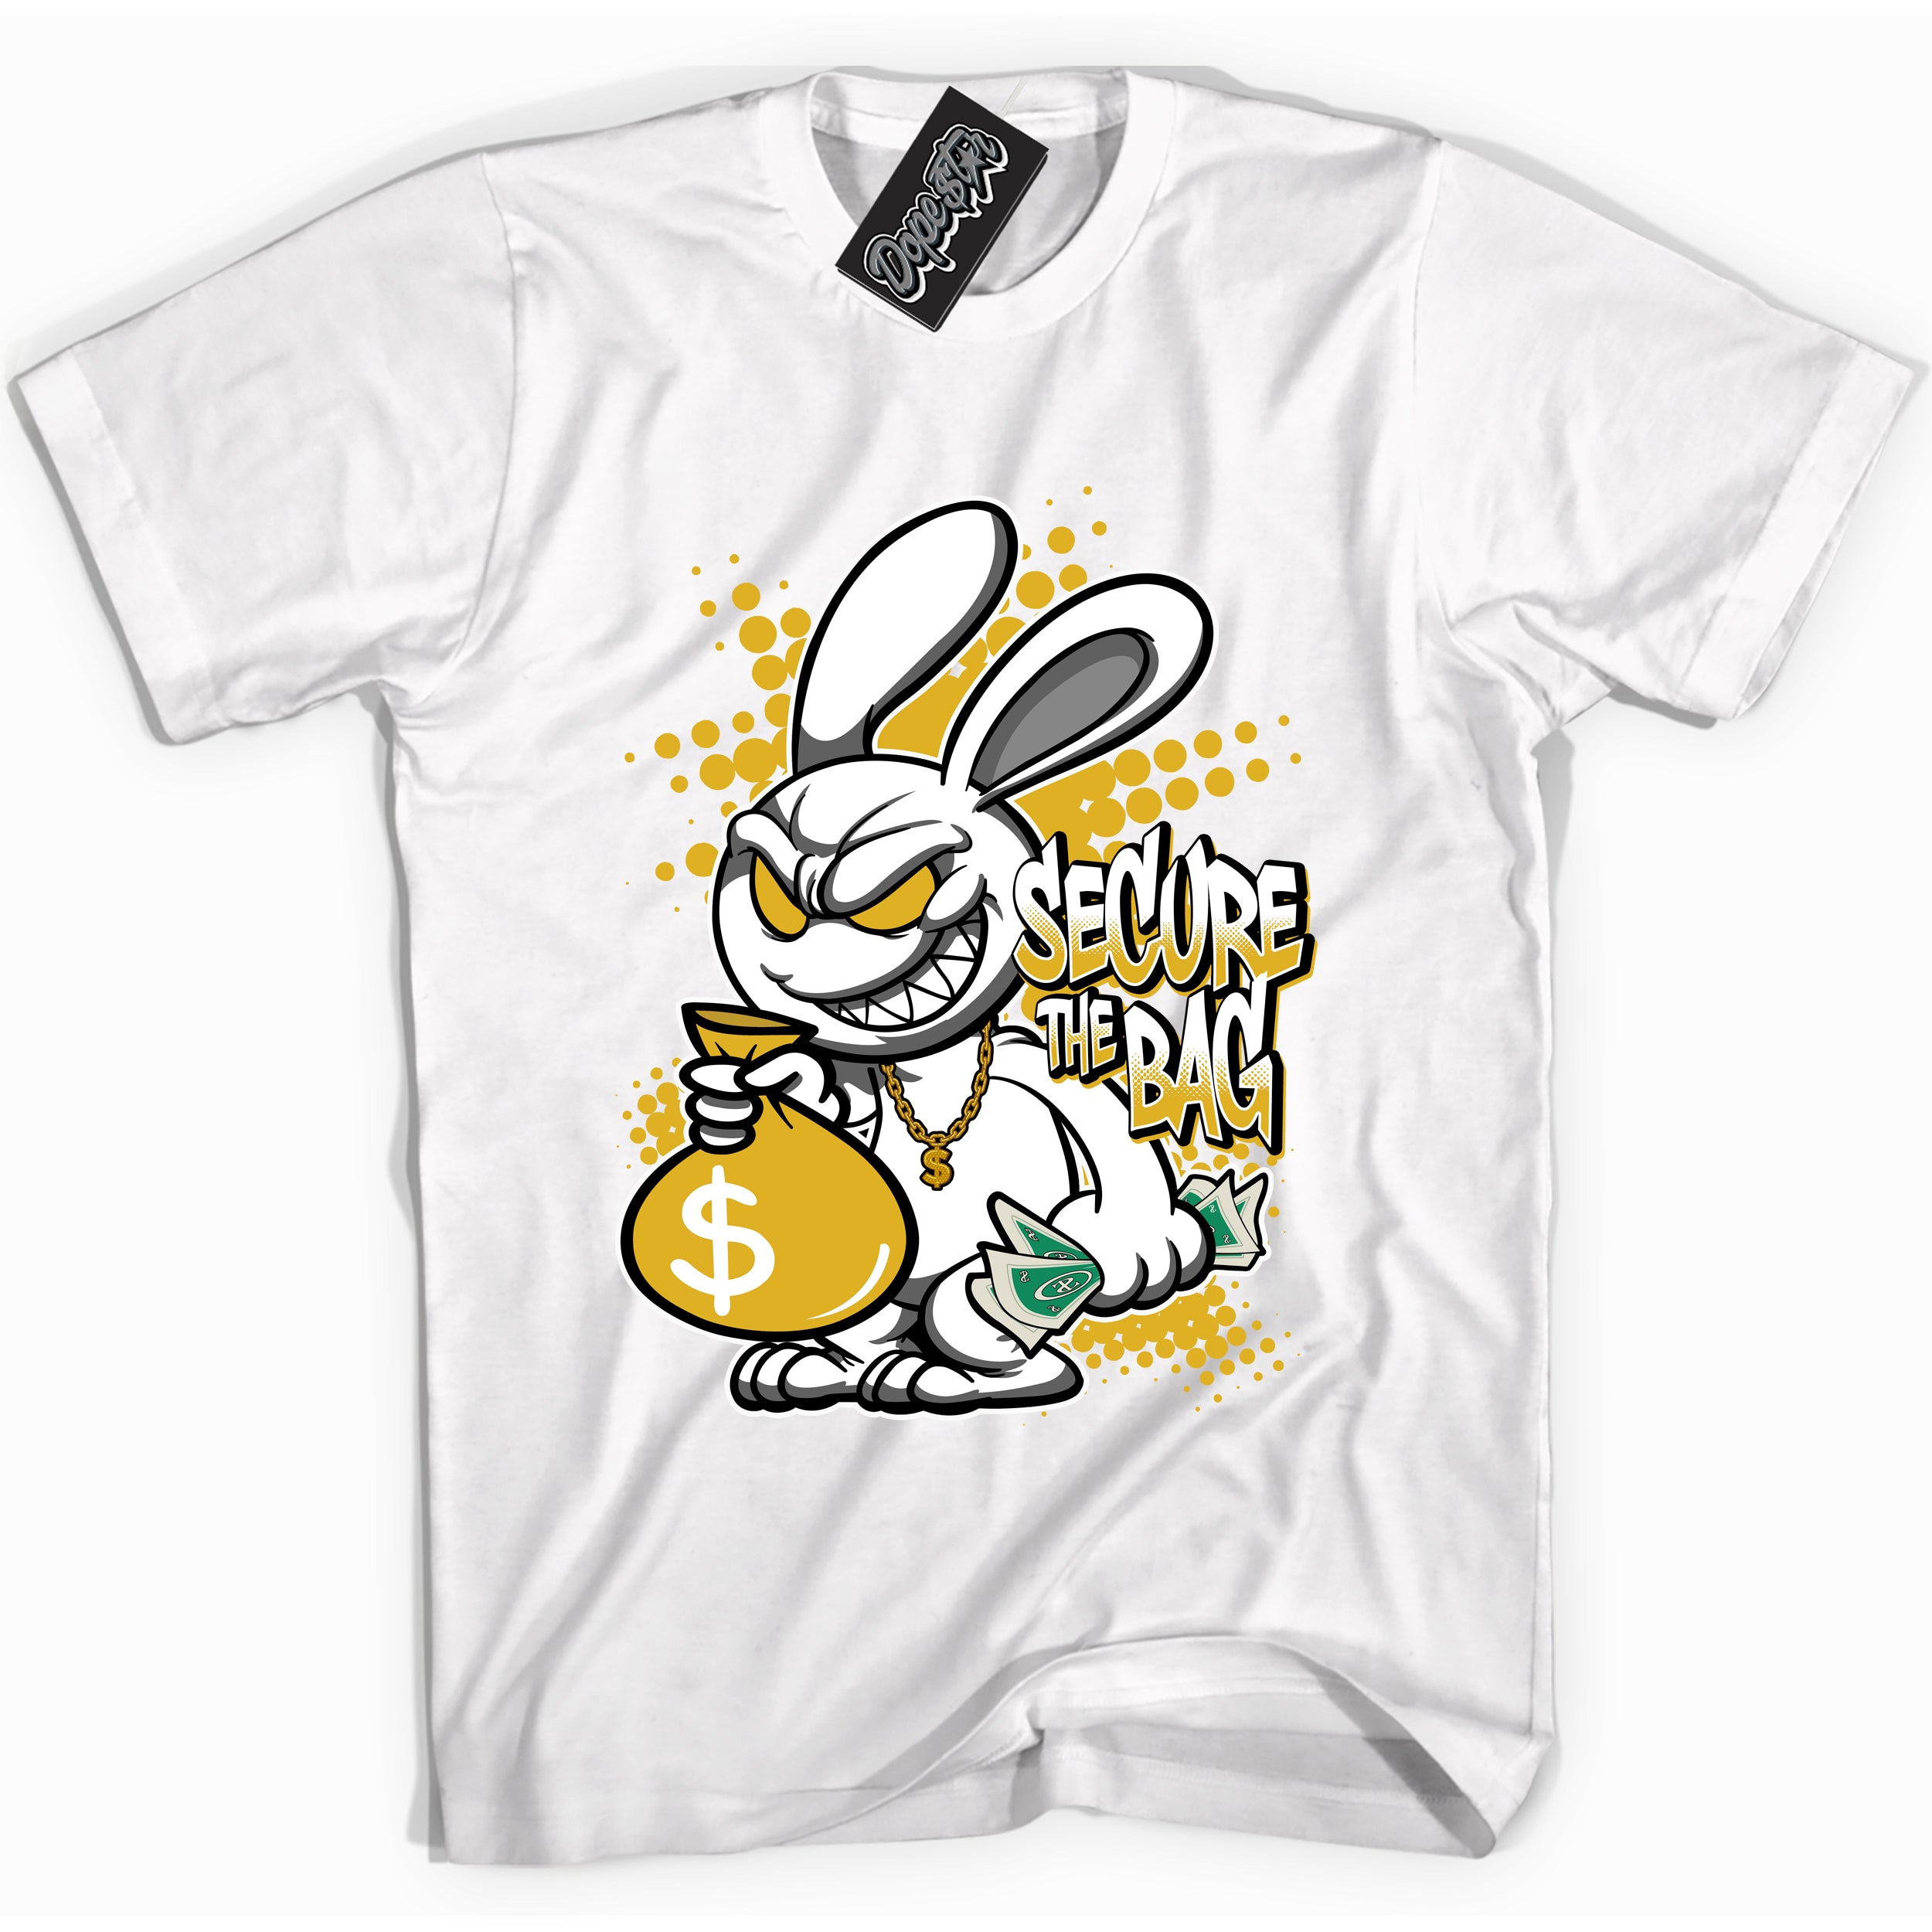 Cool White Shirt with “ Secure The Bag” design that perfectly matches Yellow Ochre 6s Sneakers.